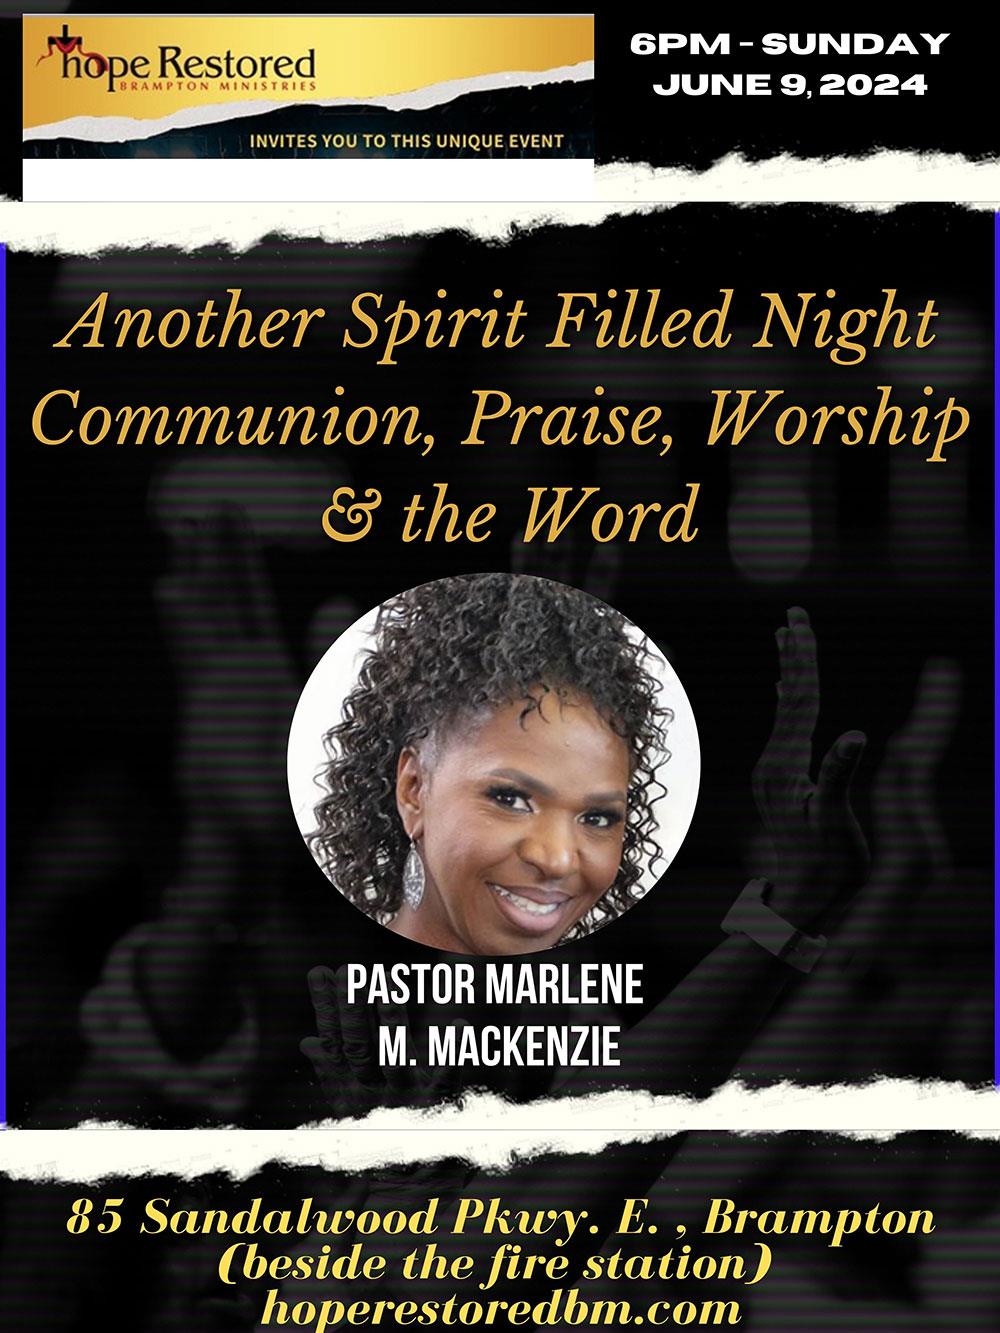 A night of praise, worship, communion and the Word